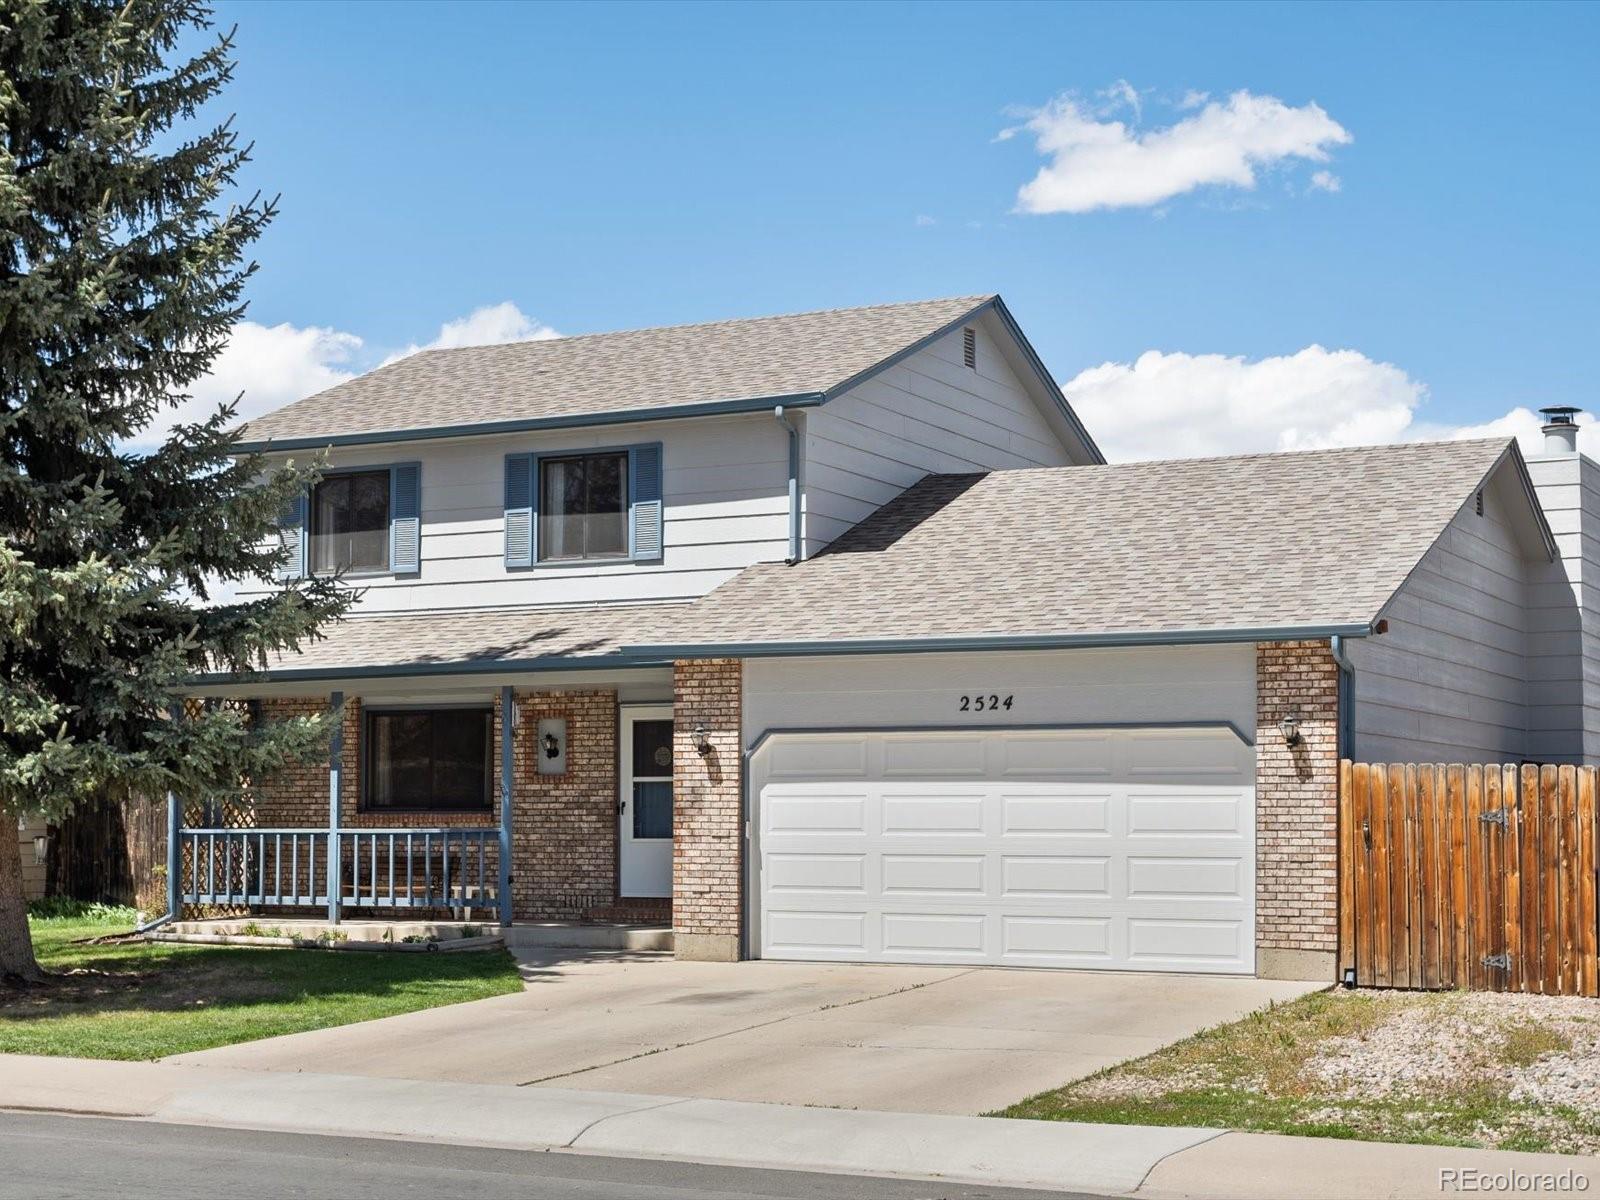 Report Image for 2524  Sunstone Drive,Fort Collins, Colorado